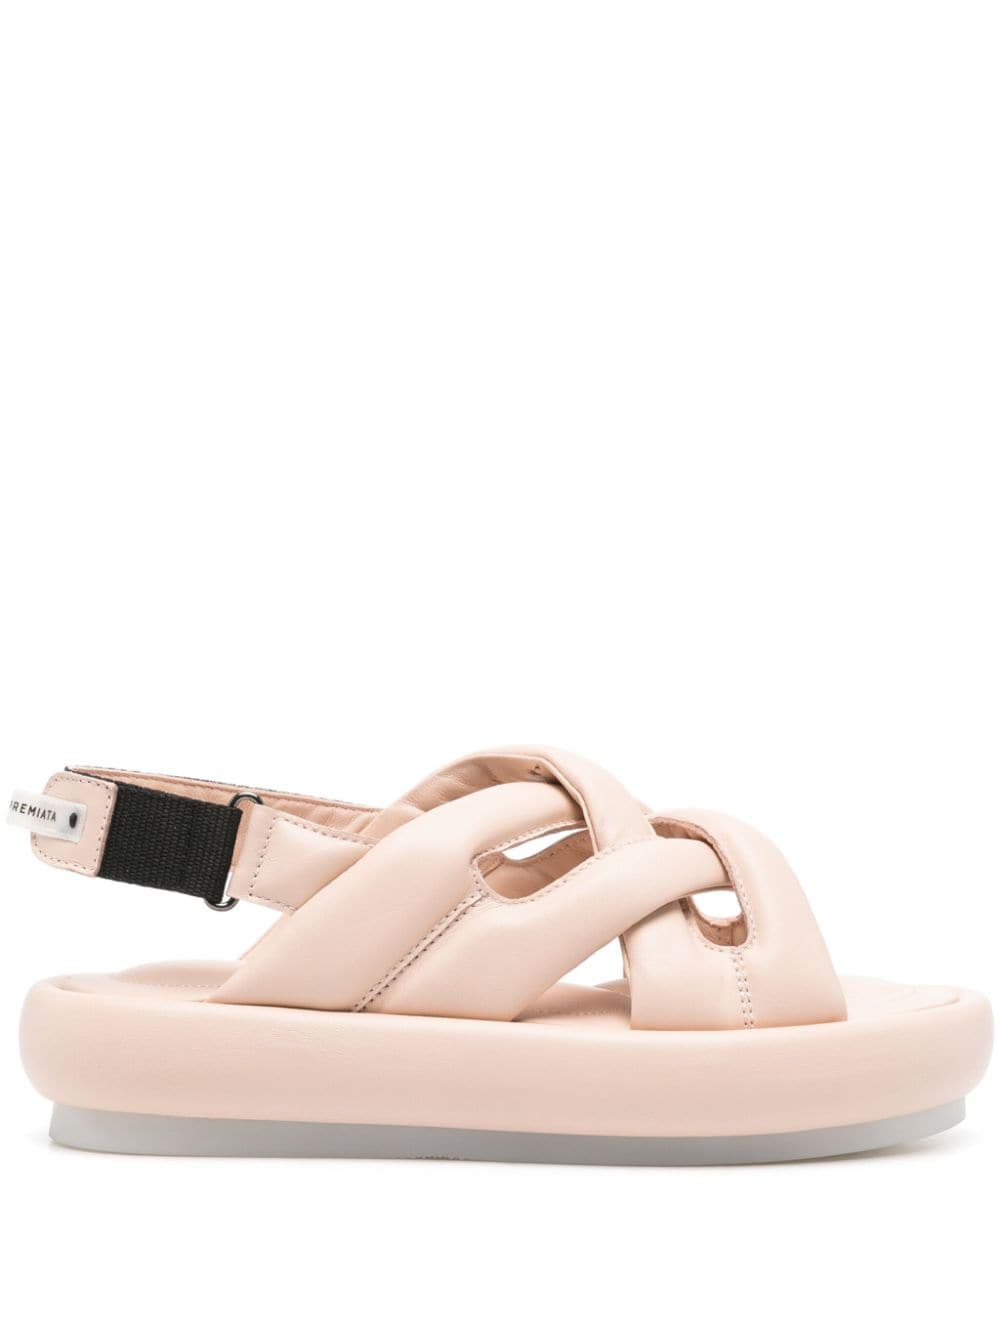 Premiata Padded Leather Sandals In Pink